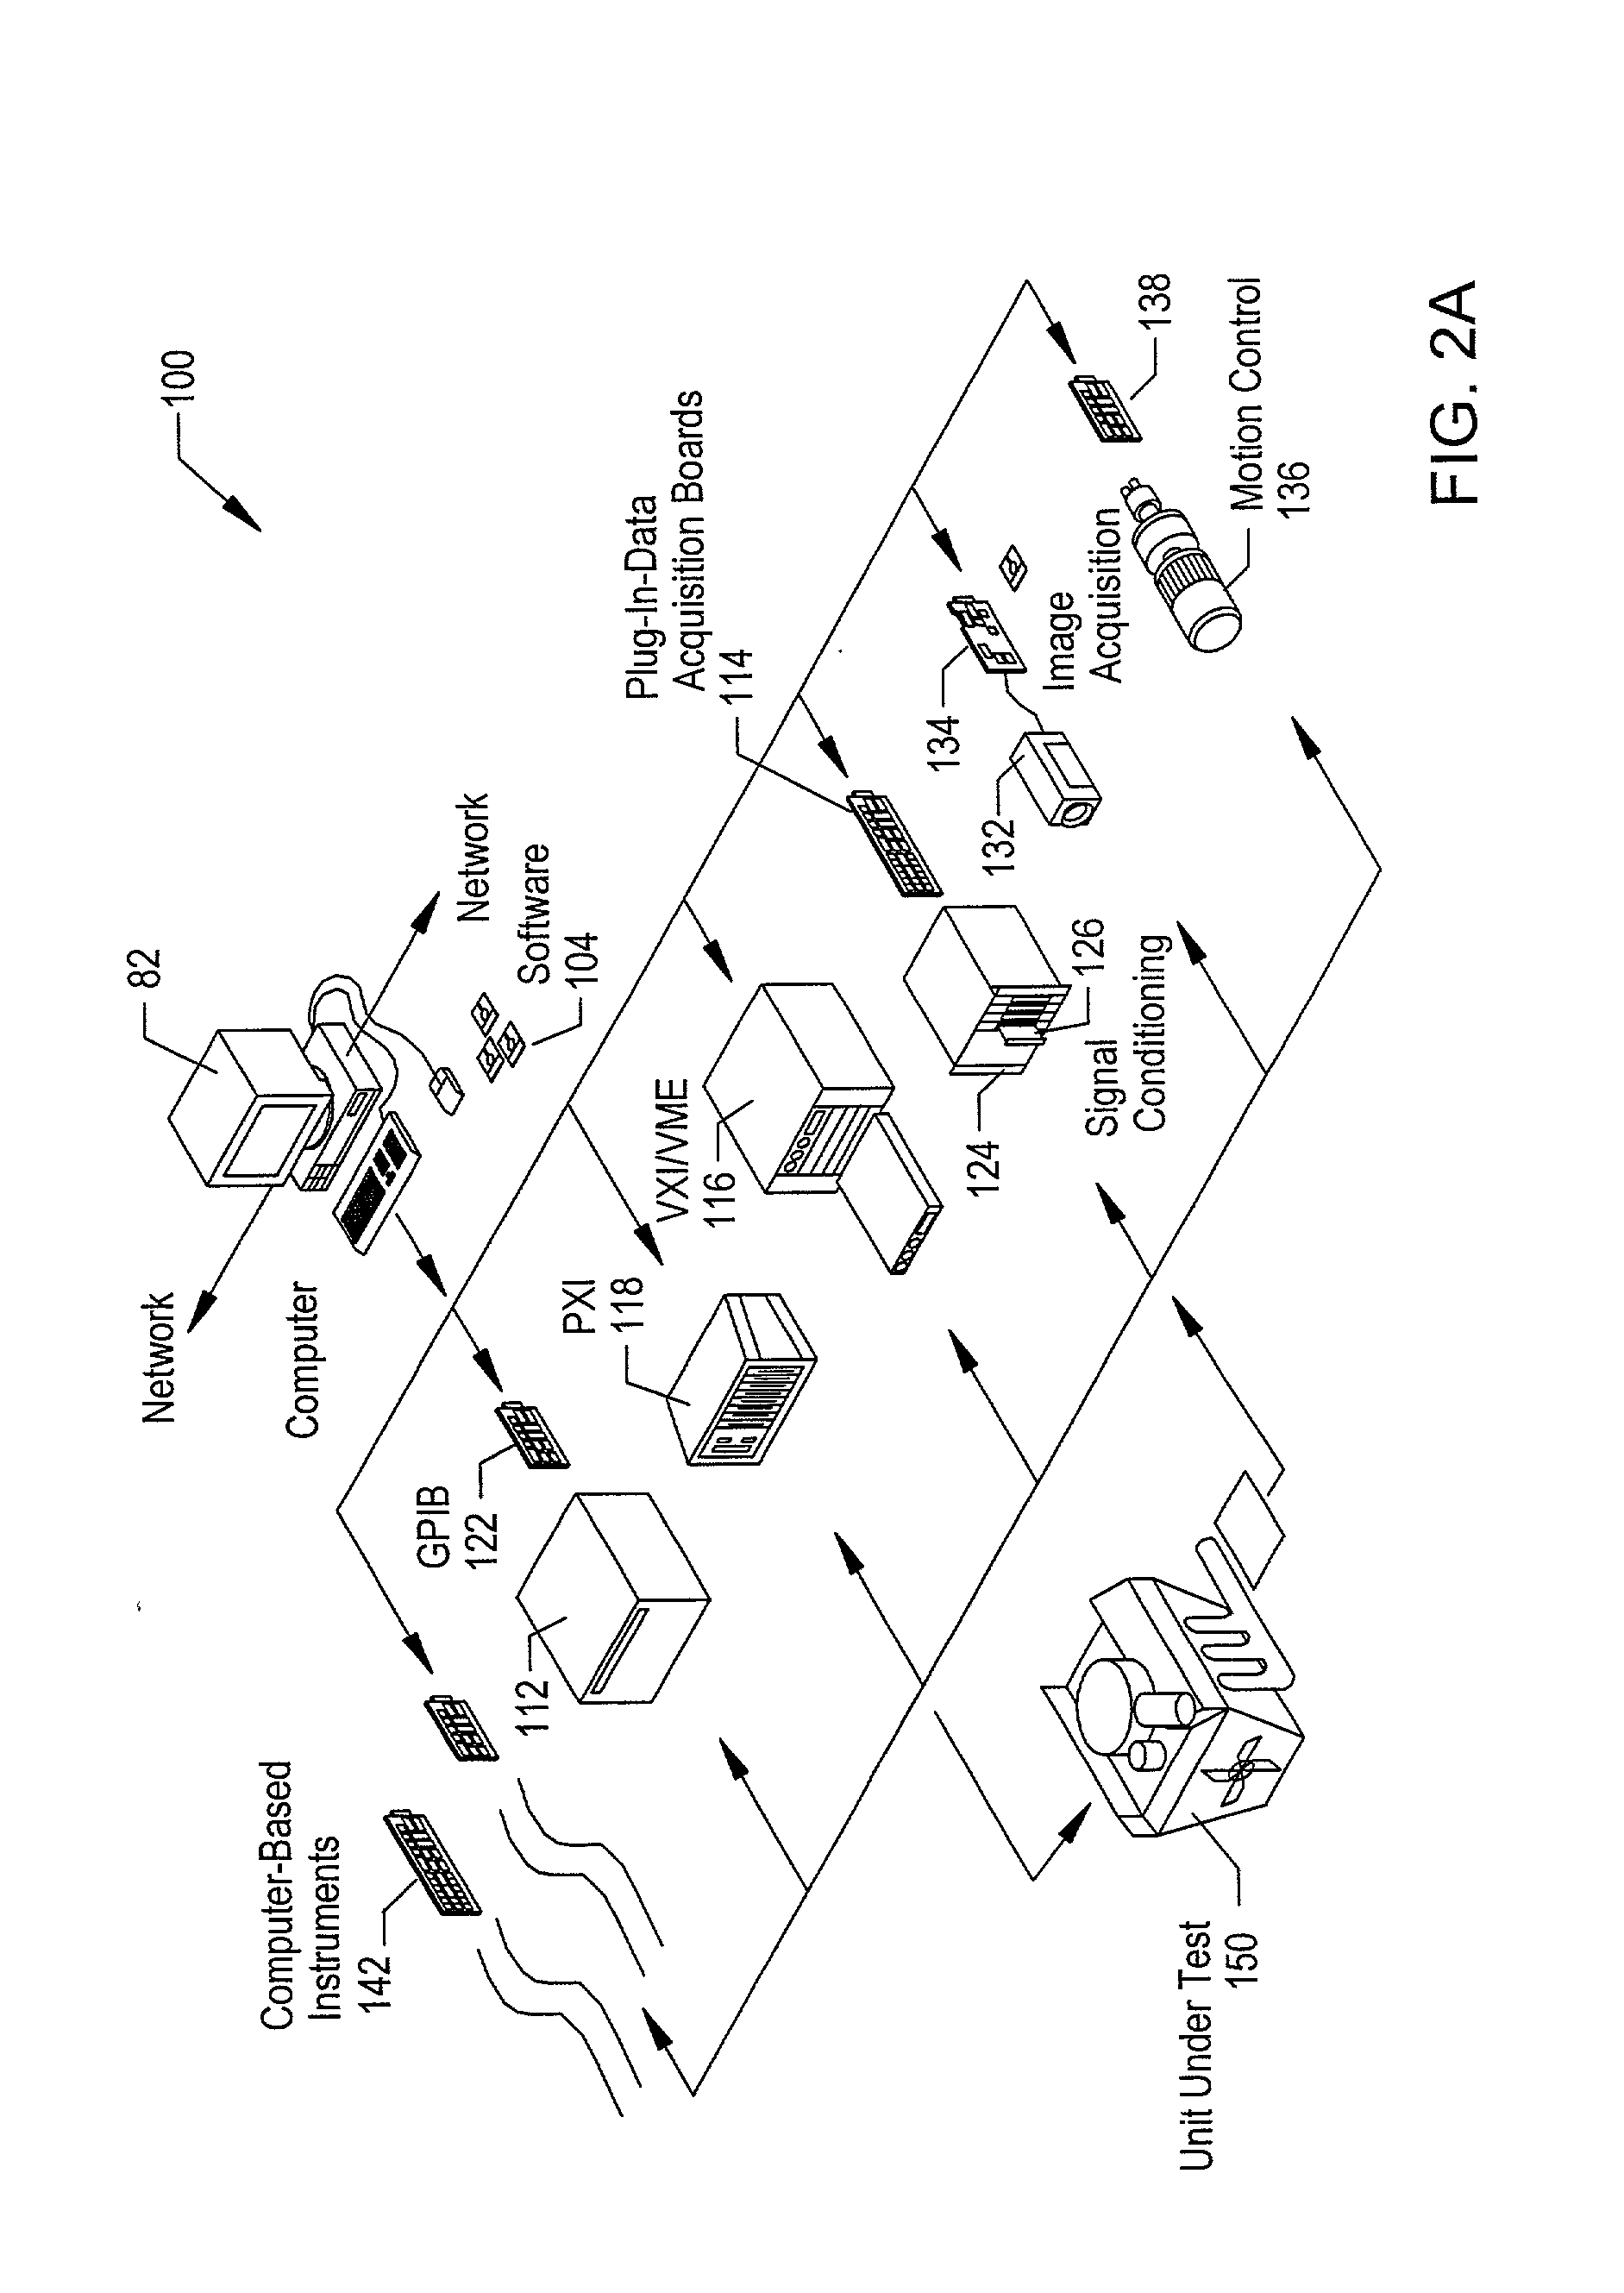 System and method for programmatically generating a graphical program based on a sequence of motion control, machine vision, and data acquisition (DAQ) operations